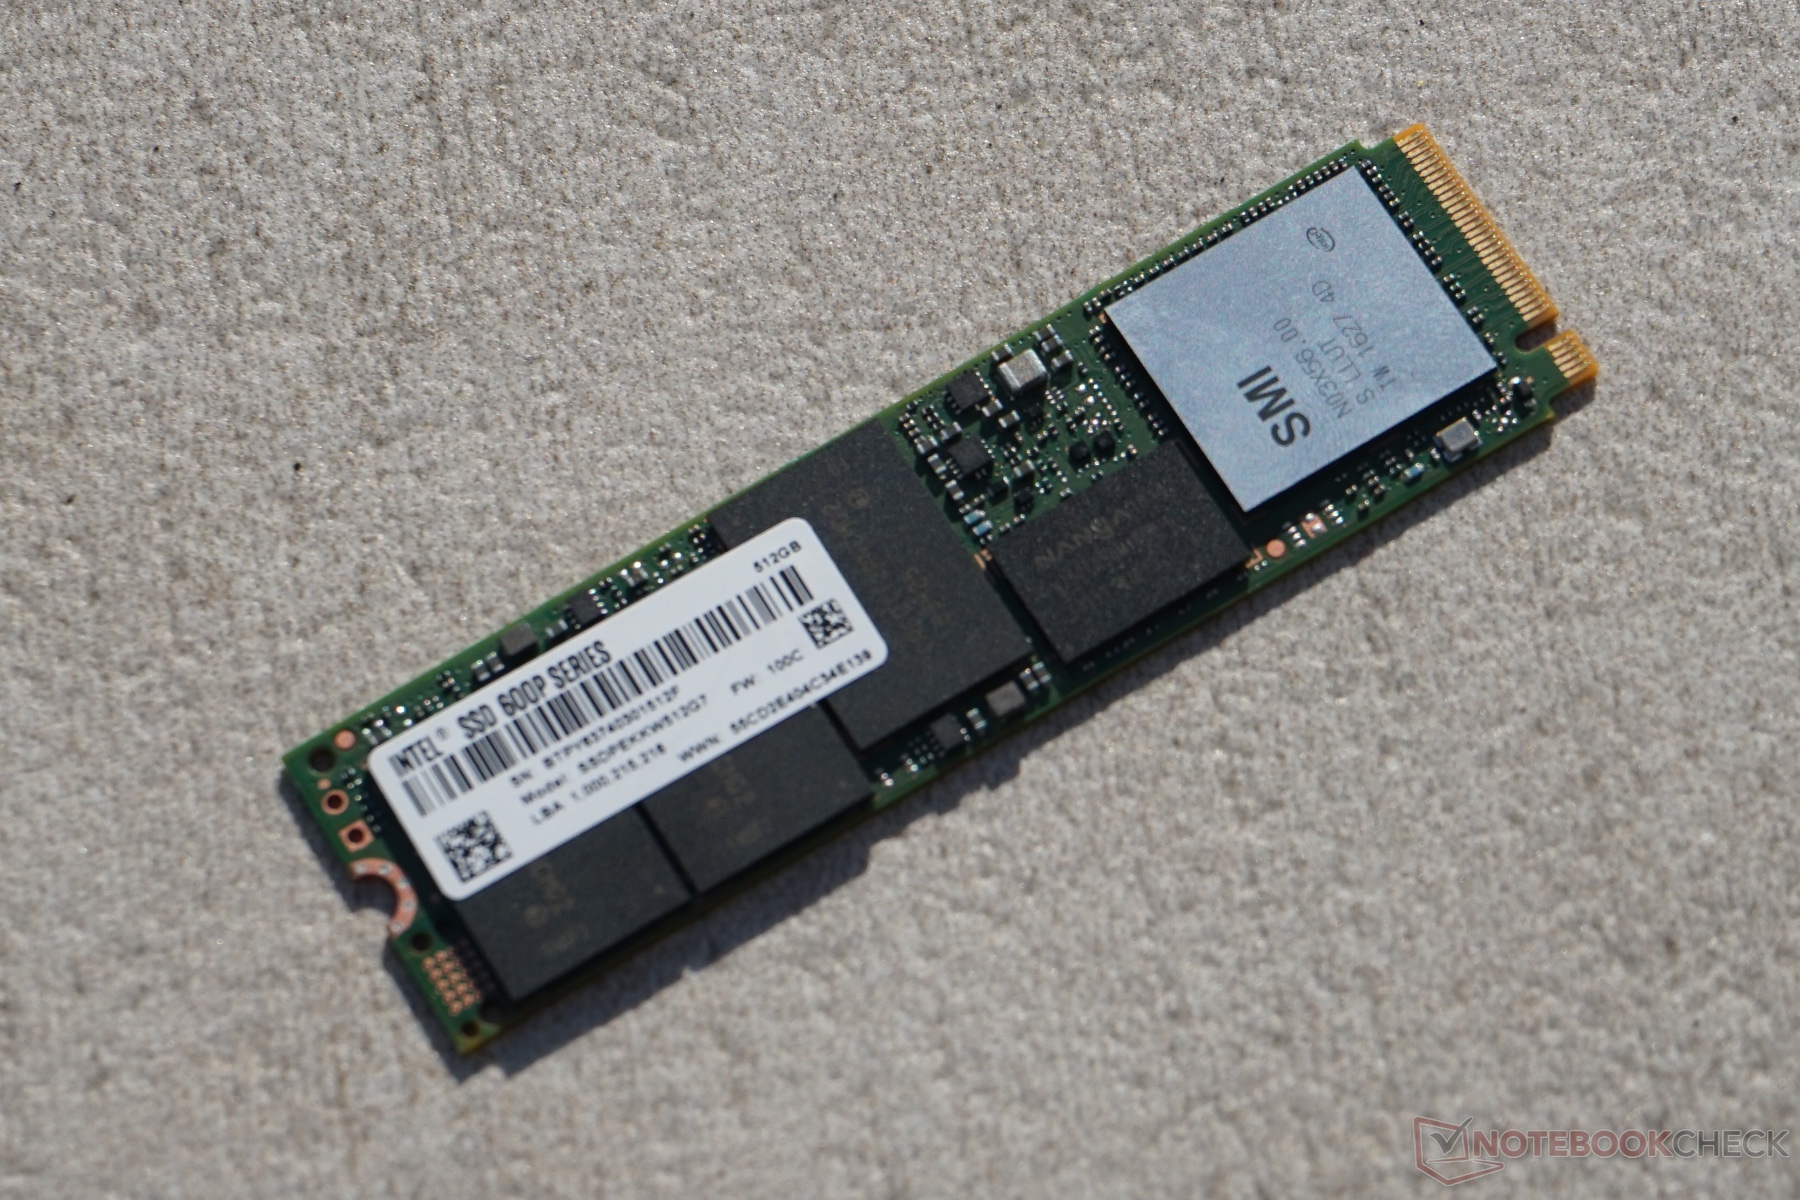 rolle argument kasseapparat Intel SSD 600p 512 GB Review: The Entry-Level NVMe SSD - NotebookCheck.net  Reviews